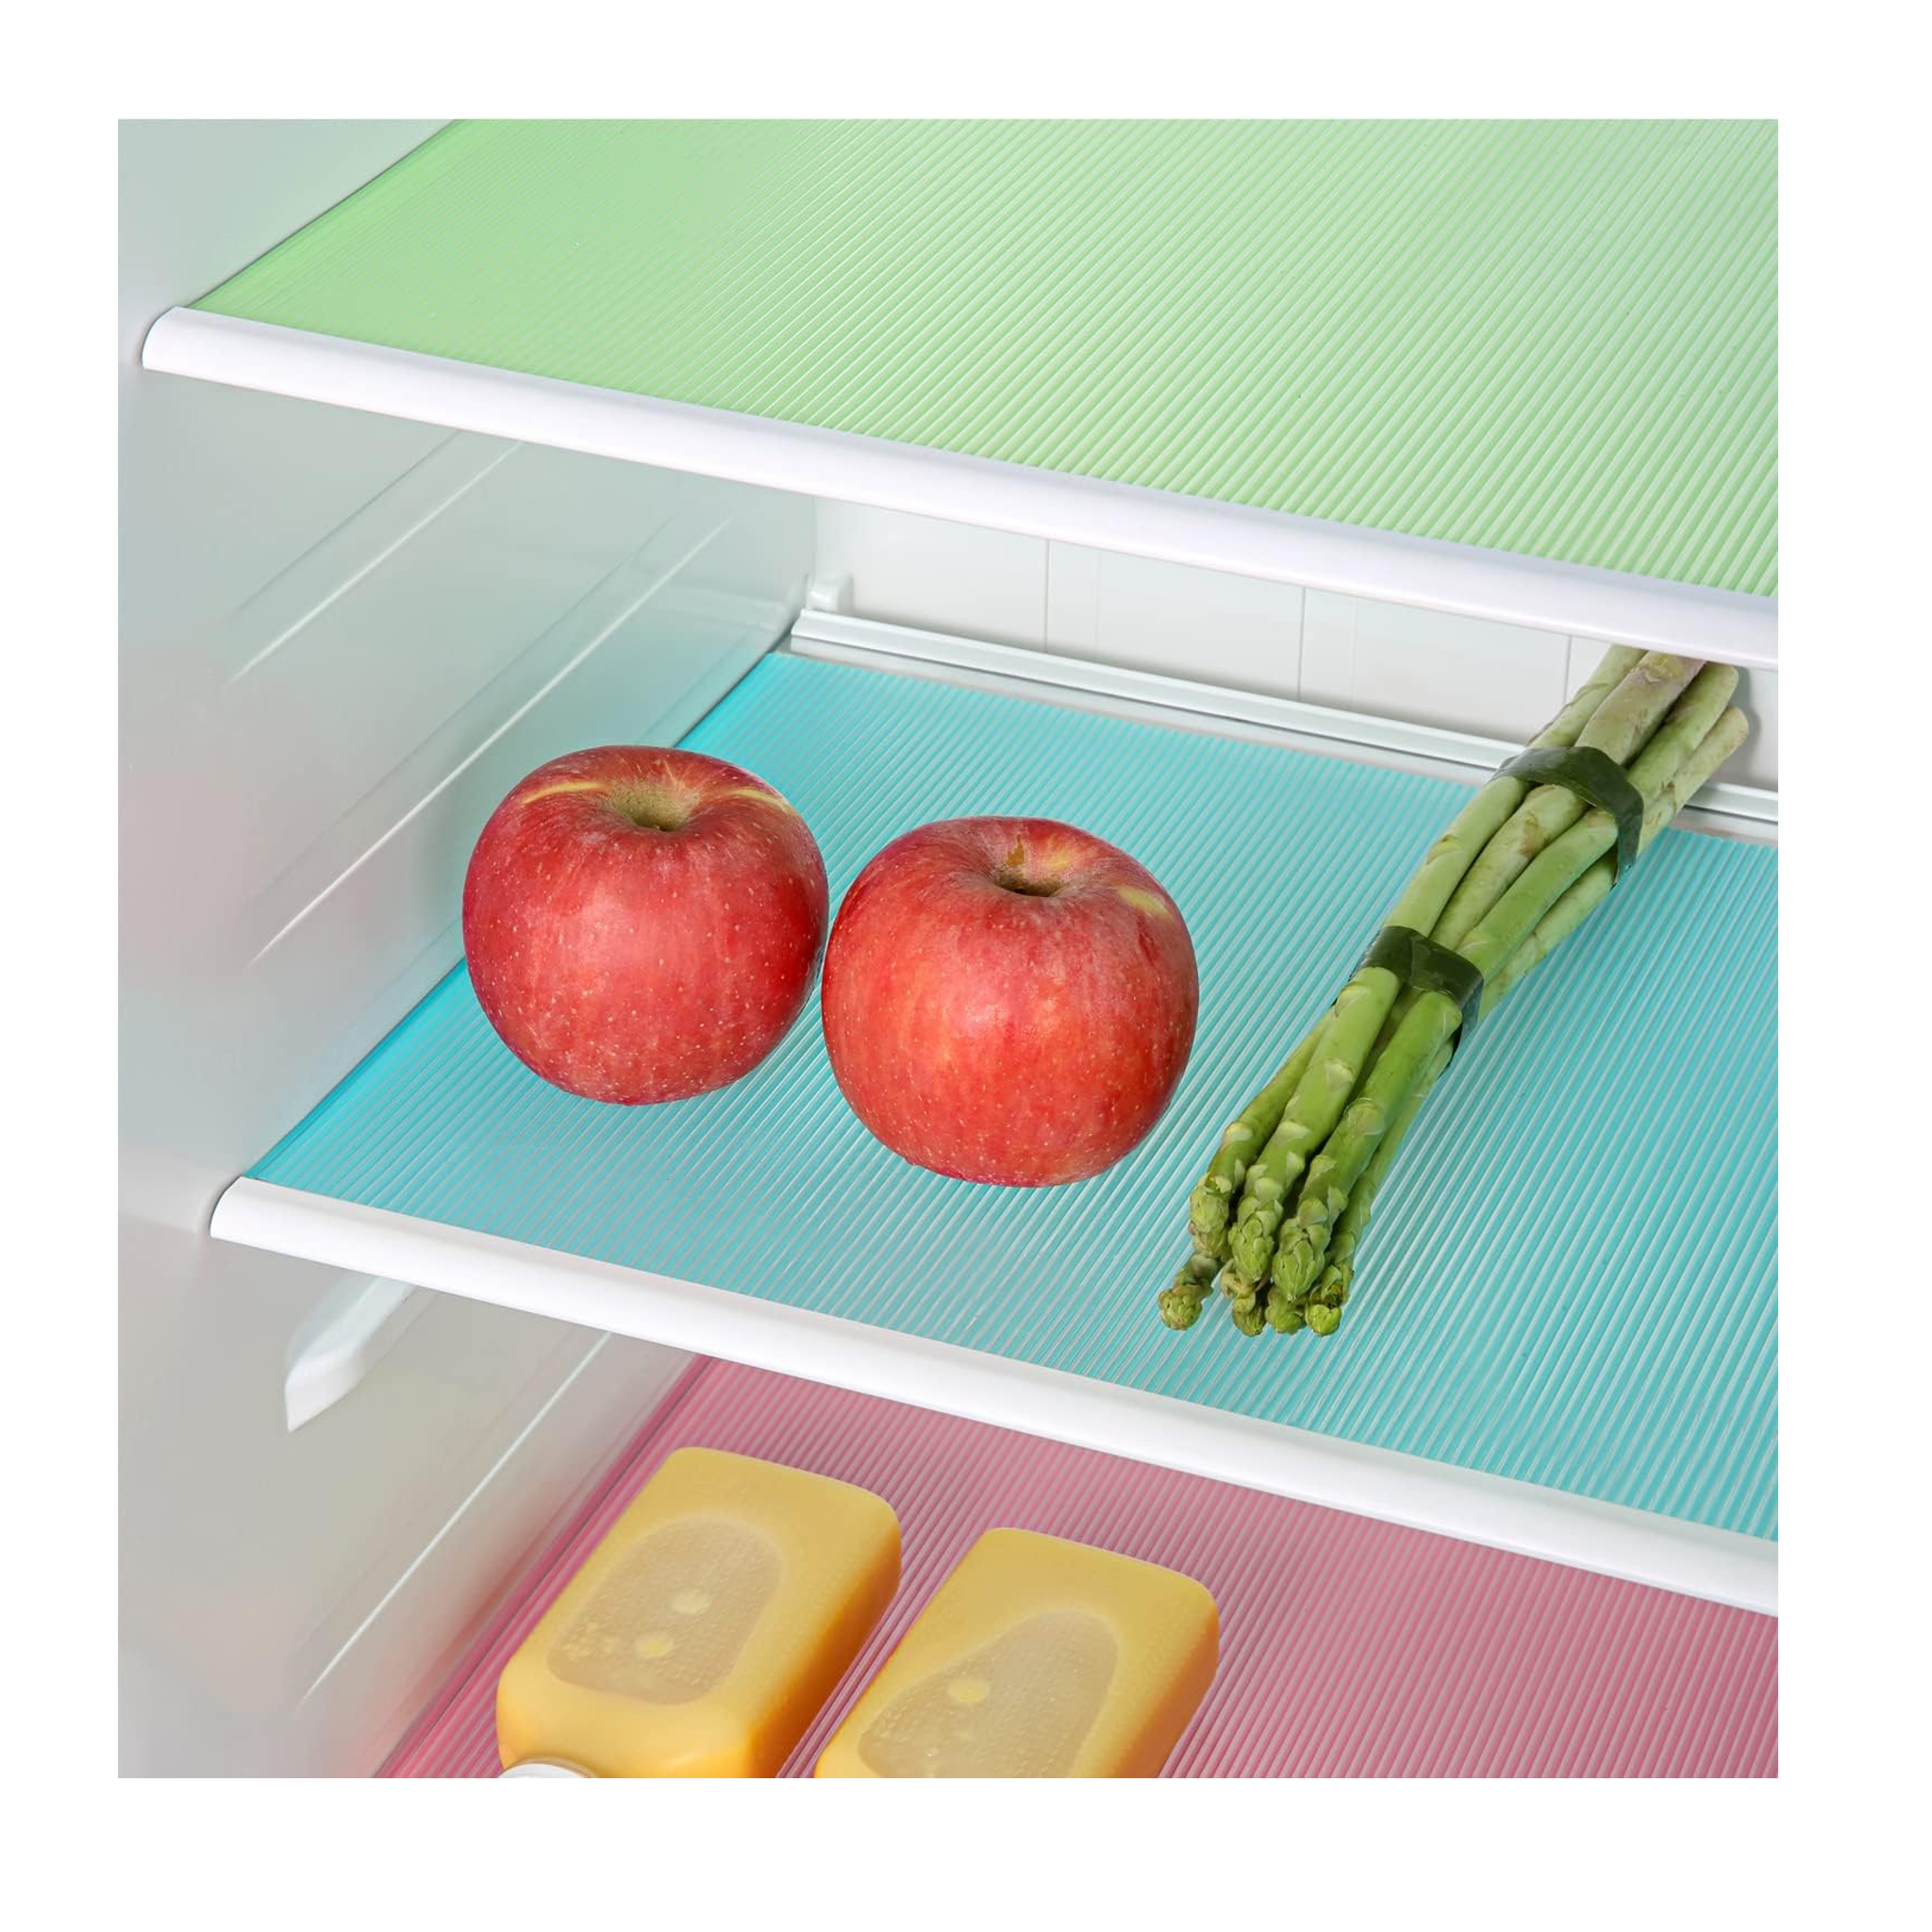 16 Refrigerator Liner Mats for Organizing and Protecting Fridge Shelves